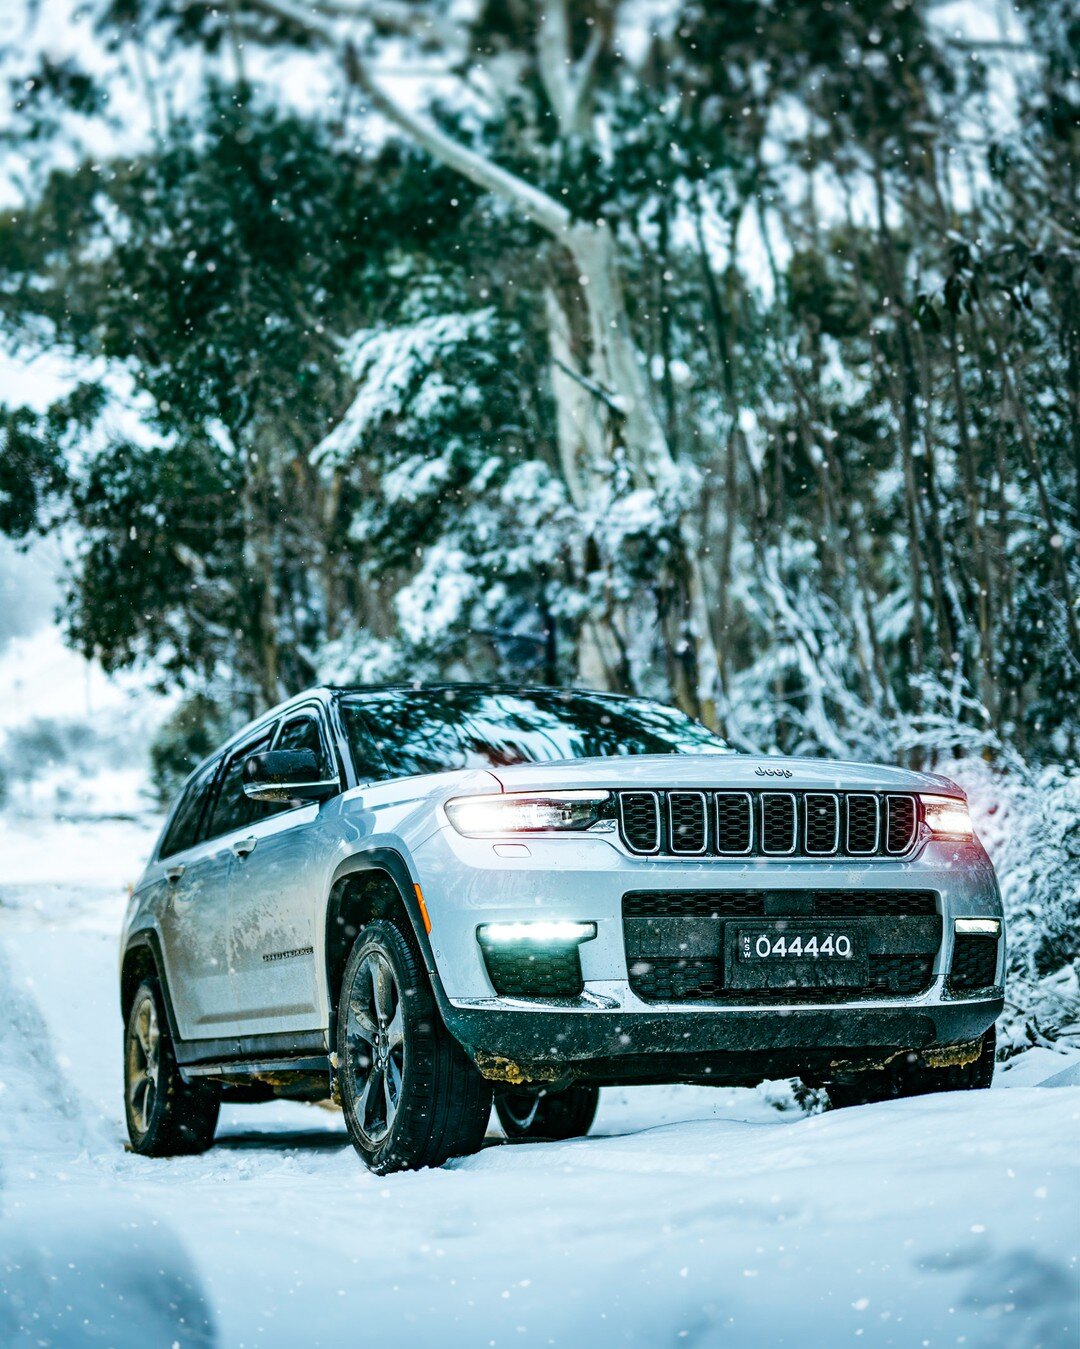 It had been years since I&rsquo;d been to the snow &ndash; thanks, covid &ndash;  so needless to say I jumped at the chance to trial the all-new Jeep Grand Cherokee L in search of the season&rsquo;s first snow, just as it turned unseasonably cold thi